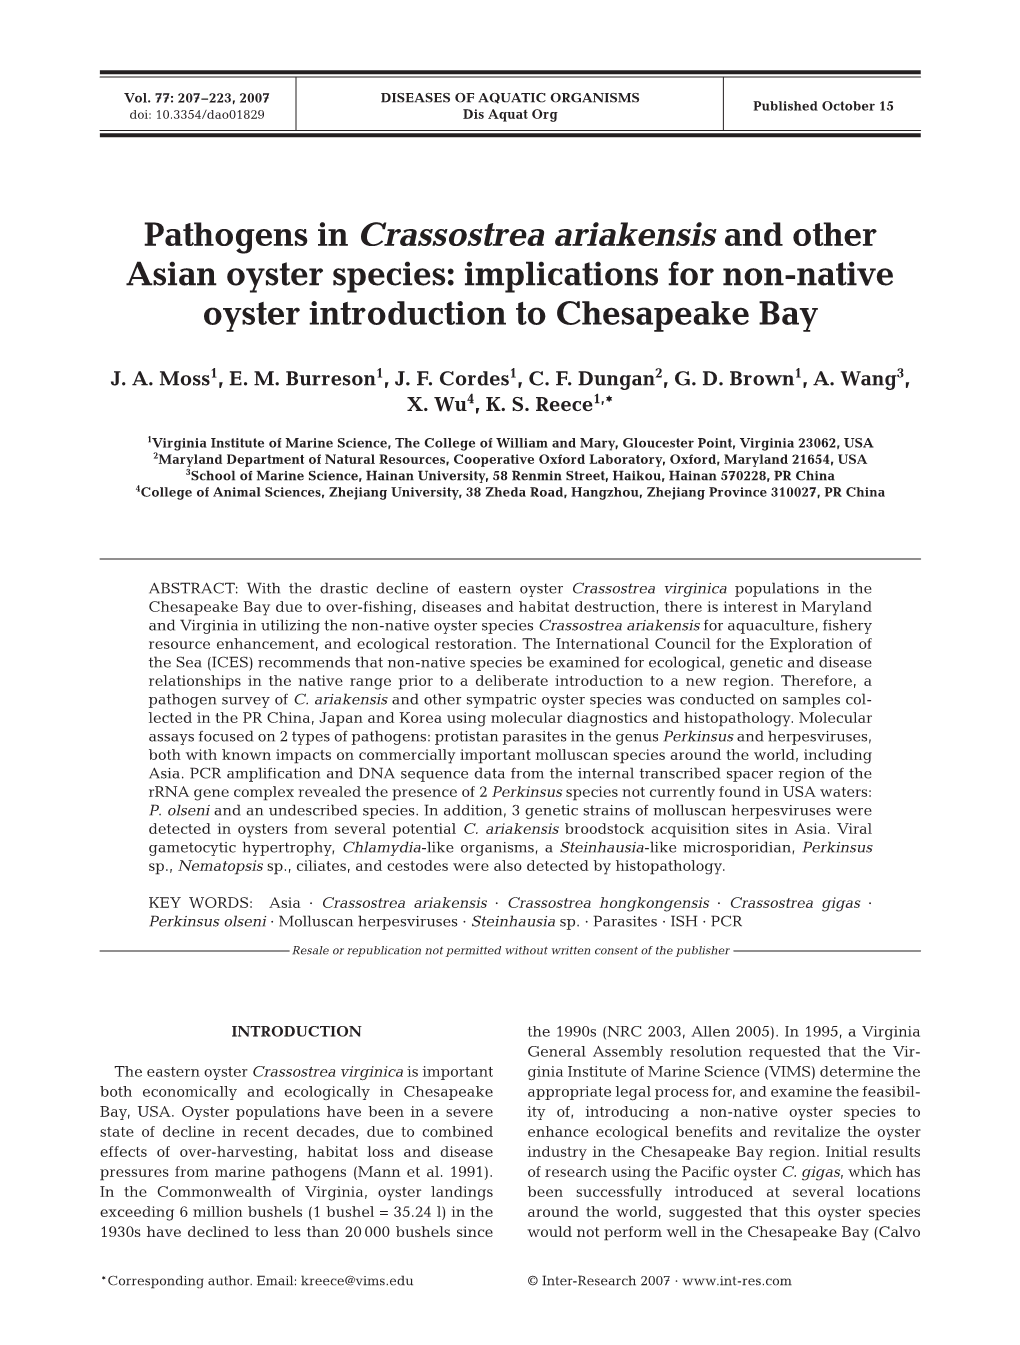 Pathogens in Crassostrea Ariakensis and Other Asian Oyster Species: Implications for Non-Native Oyster Introduction to Chesapeake Bay